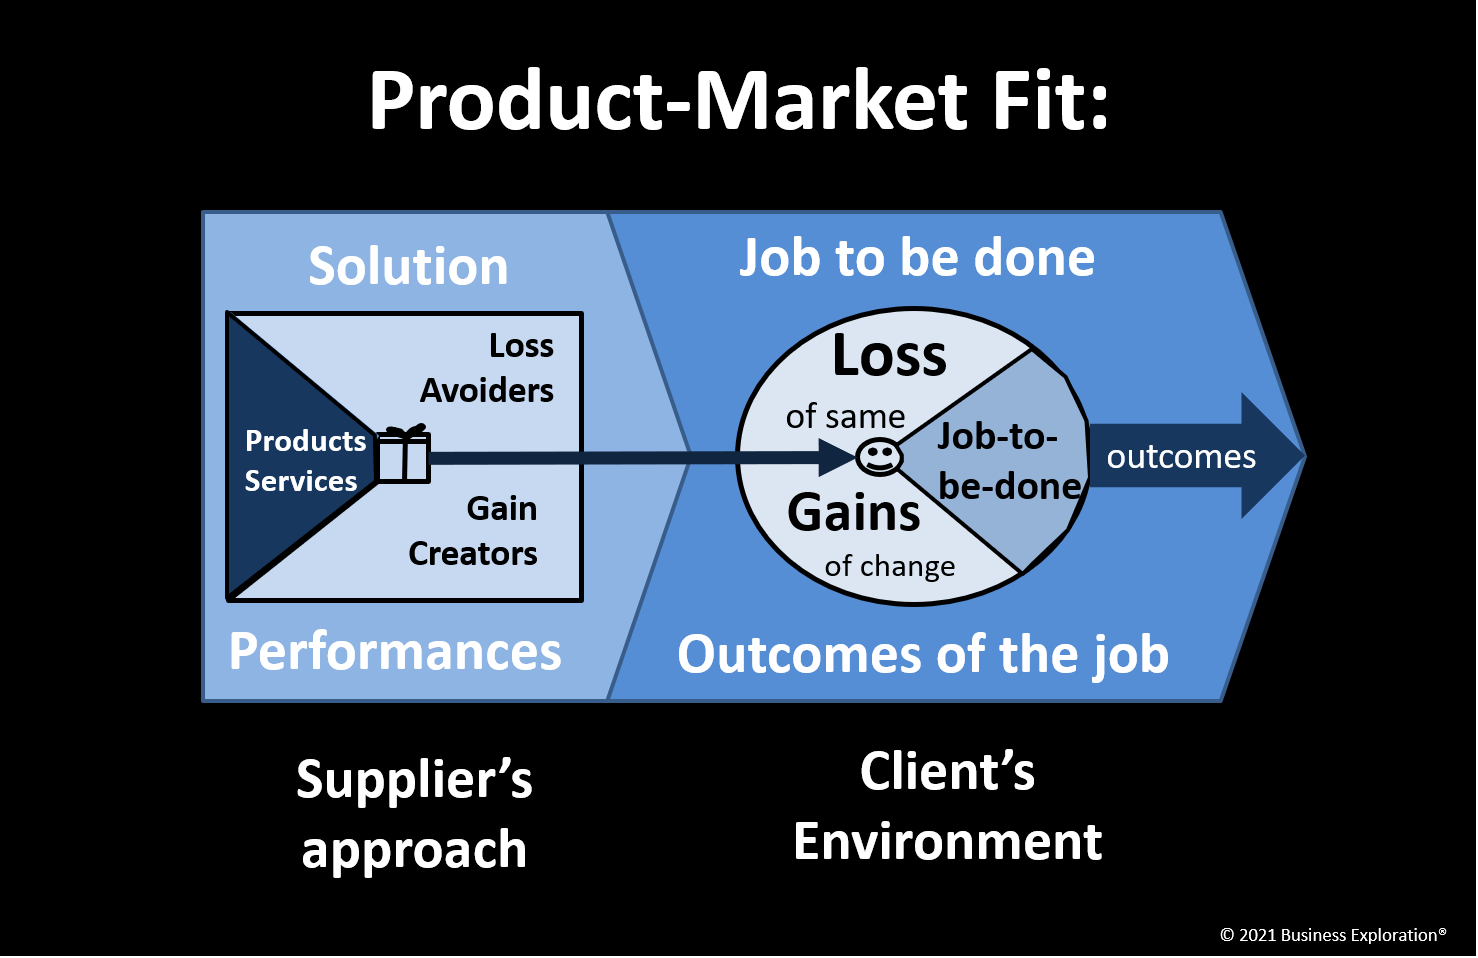 Looking for the perfect Product Market Fit? Then add "approach" and